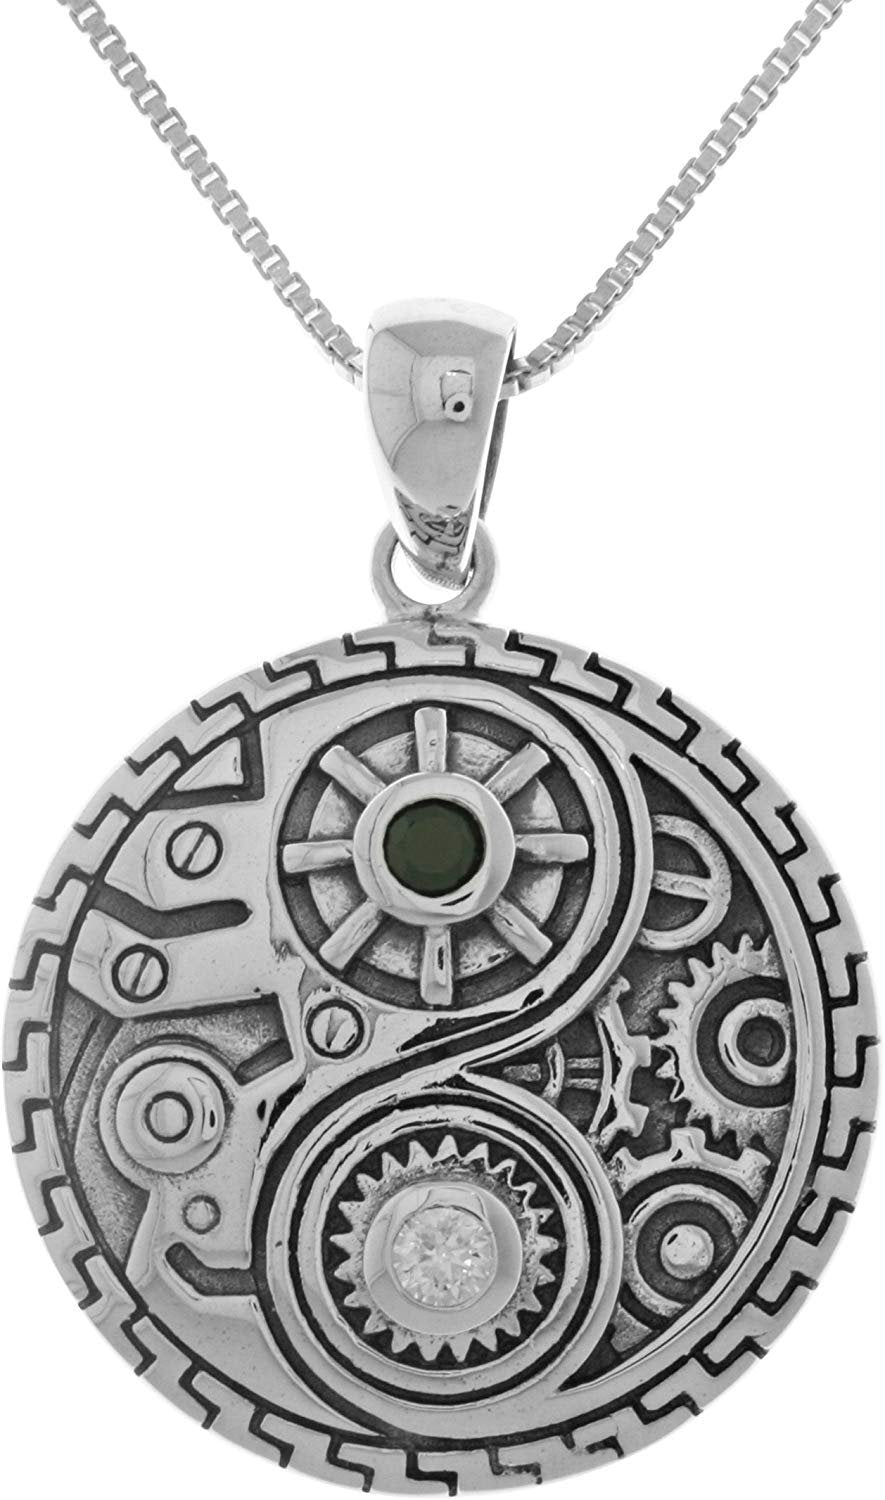 Jewelry Trends Sterling Silver and CZ Steampunk Yin Yang Pendant on 18 Inch Box Chain Necklace